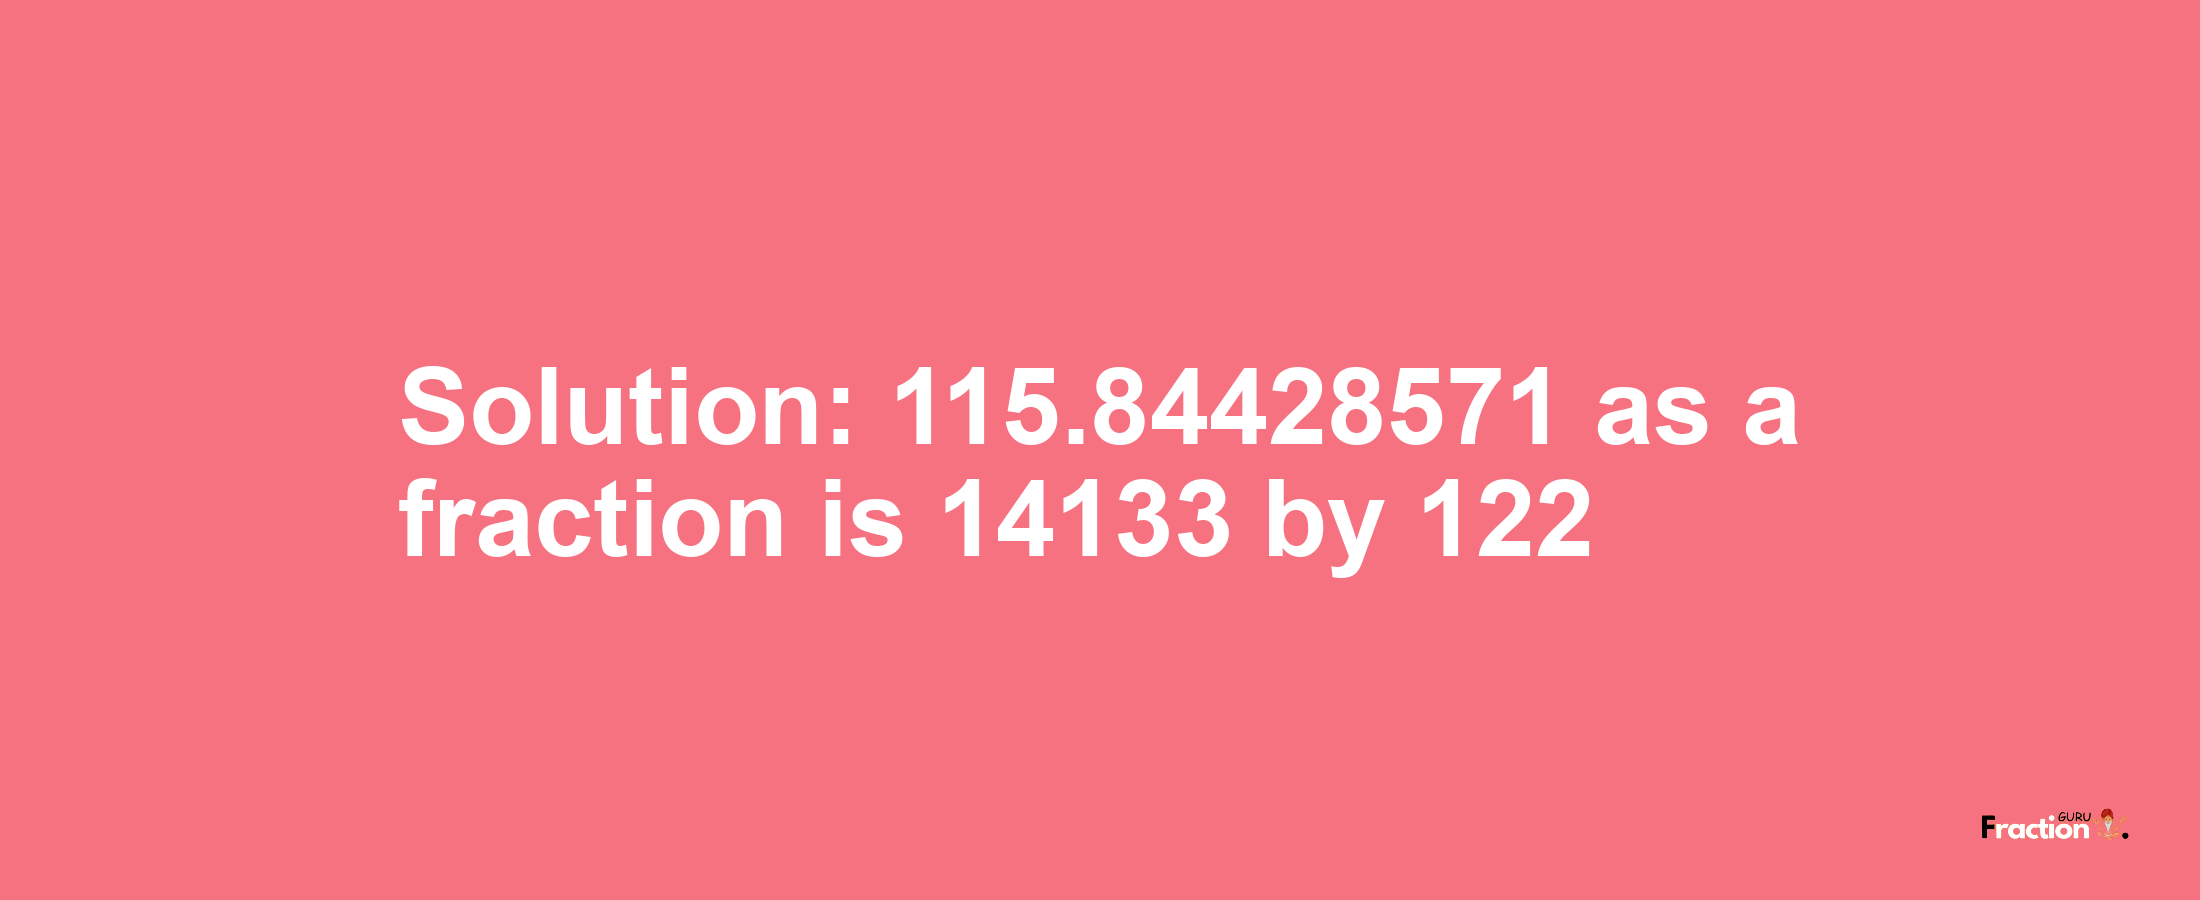 Solution:115.84428571 as a fraction is 14133/122